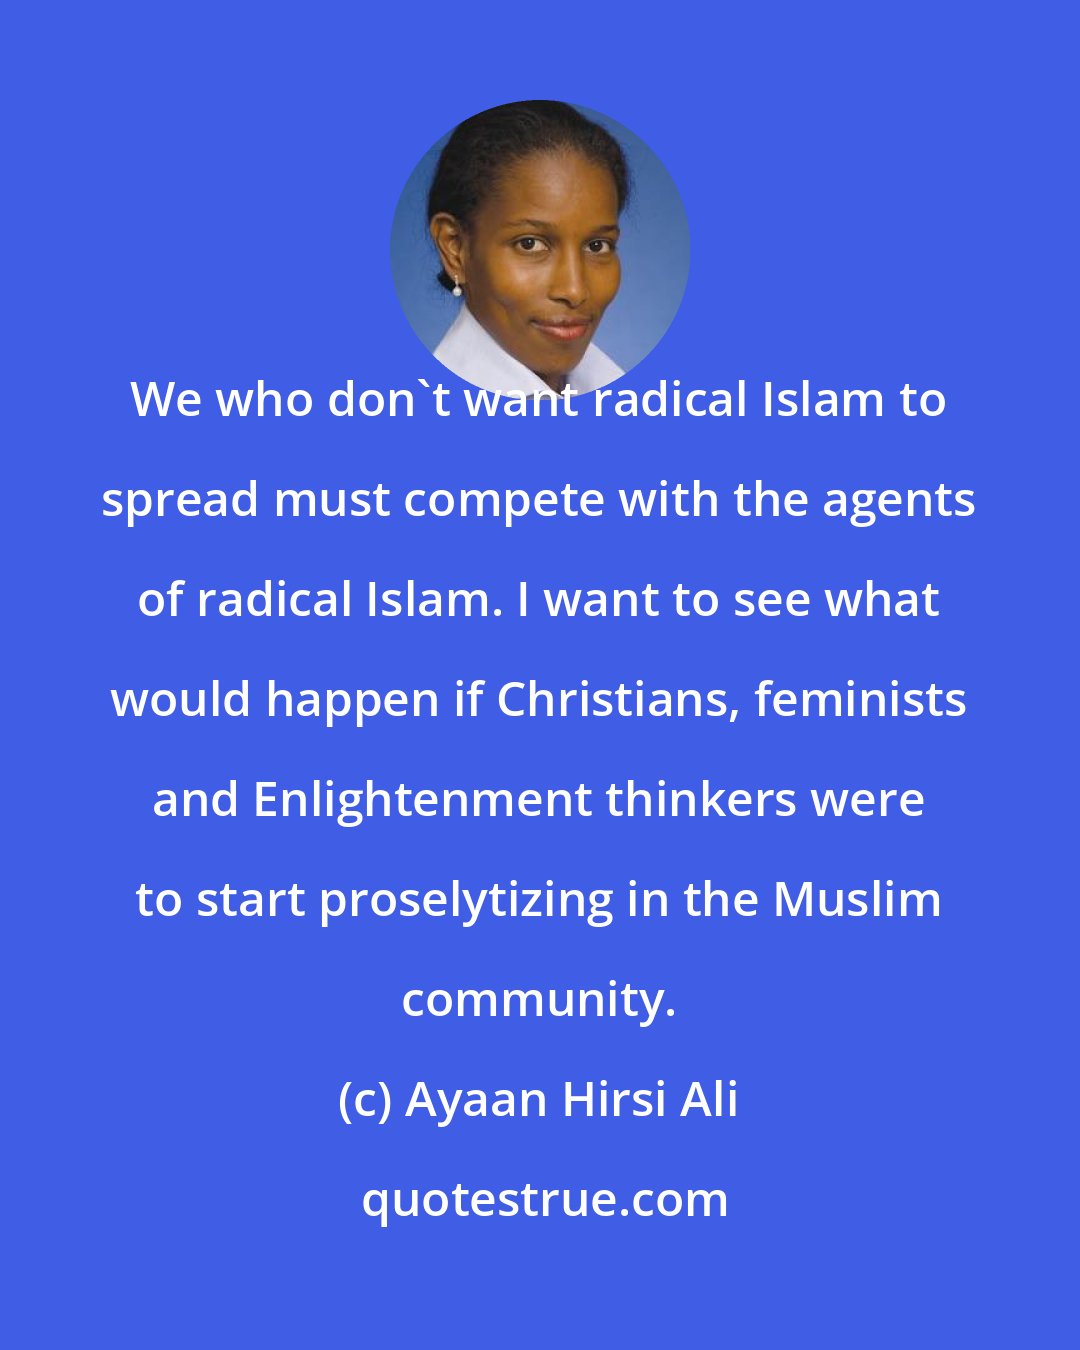 Ayaan Hirsi Ali: We who don't want radical Islam to spread must compete with the agents of radical Islam. I want to see what would happen if Christians, feminists and Enlightenment thinkers were to start proselytizing in the Muslim community.